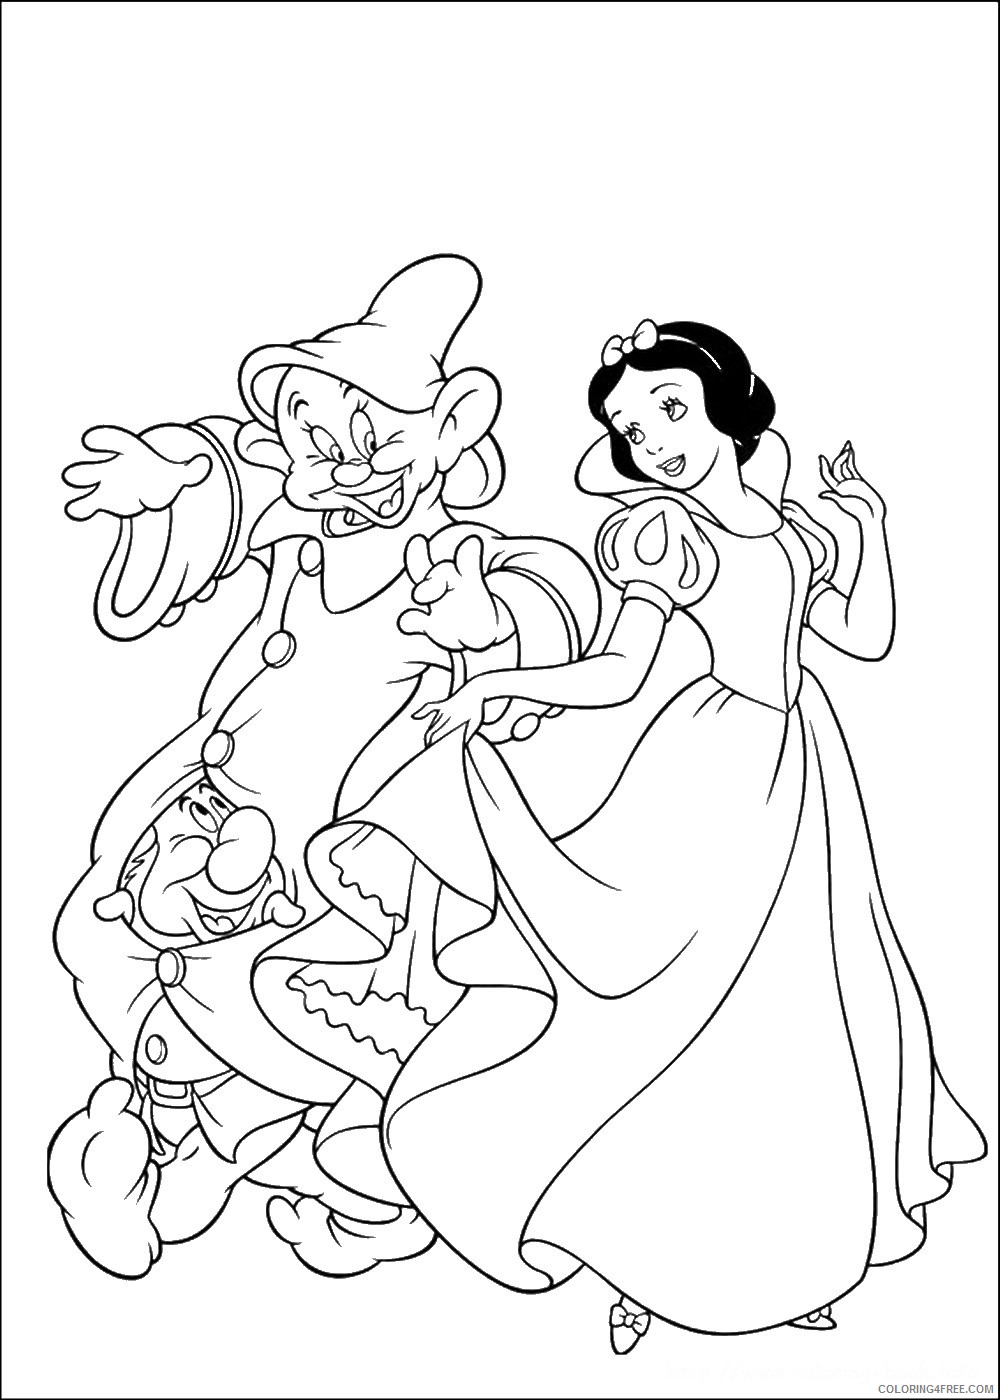 Snow White Coloring Pages Cartoons snow_white_cl_32 Printable 2020 5728 Coloring4free